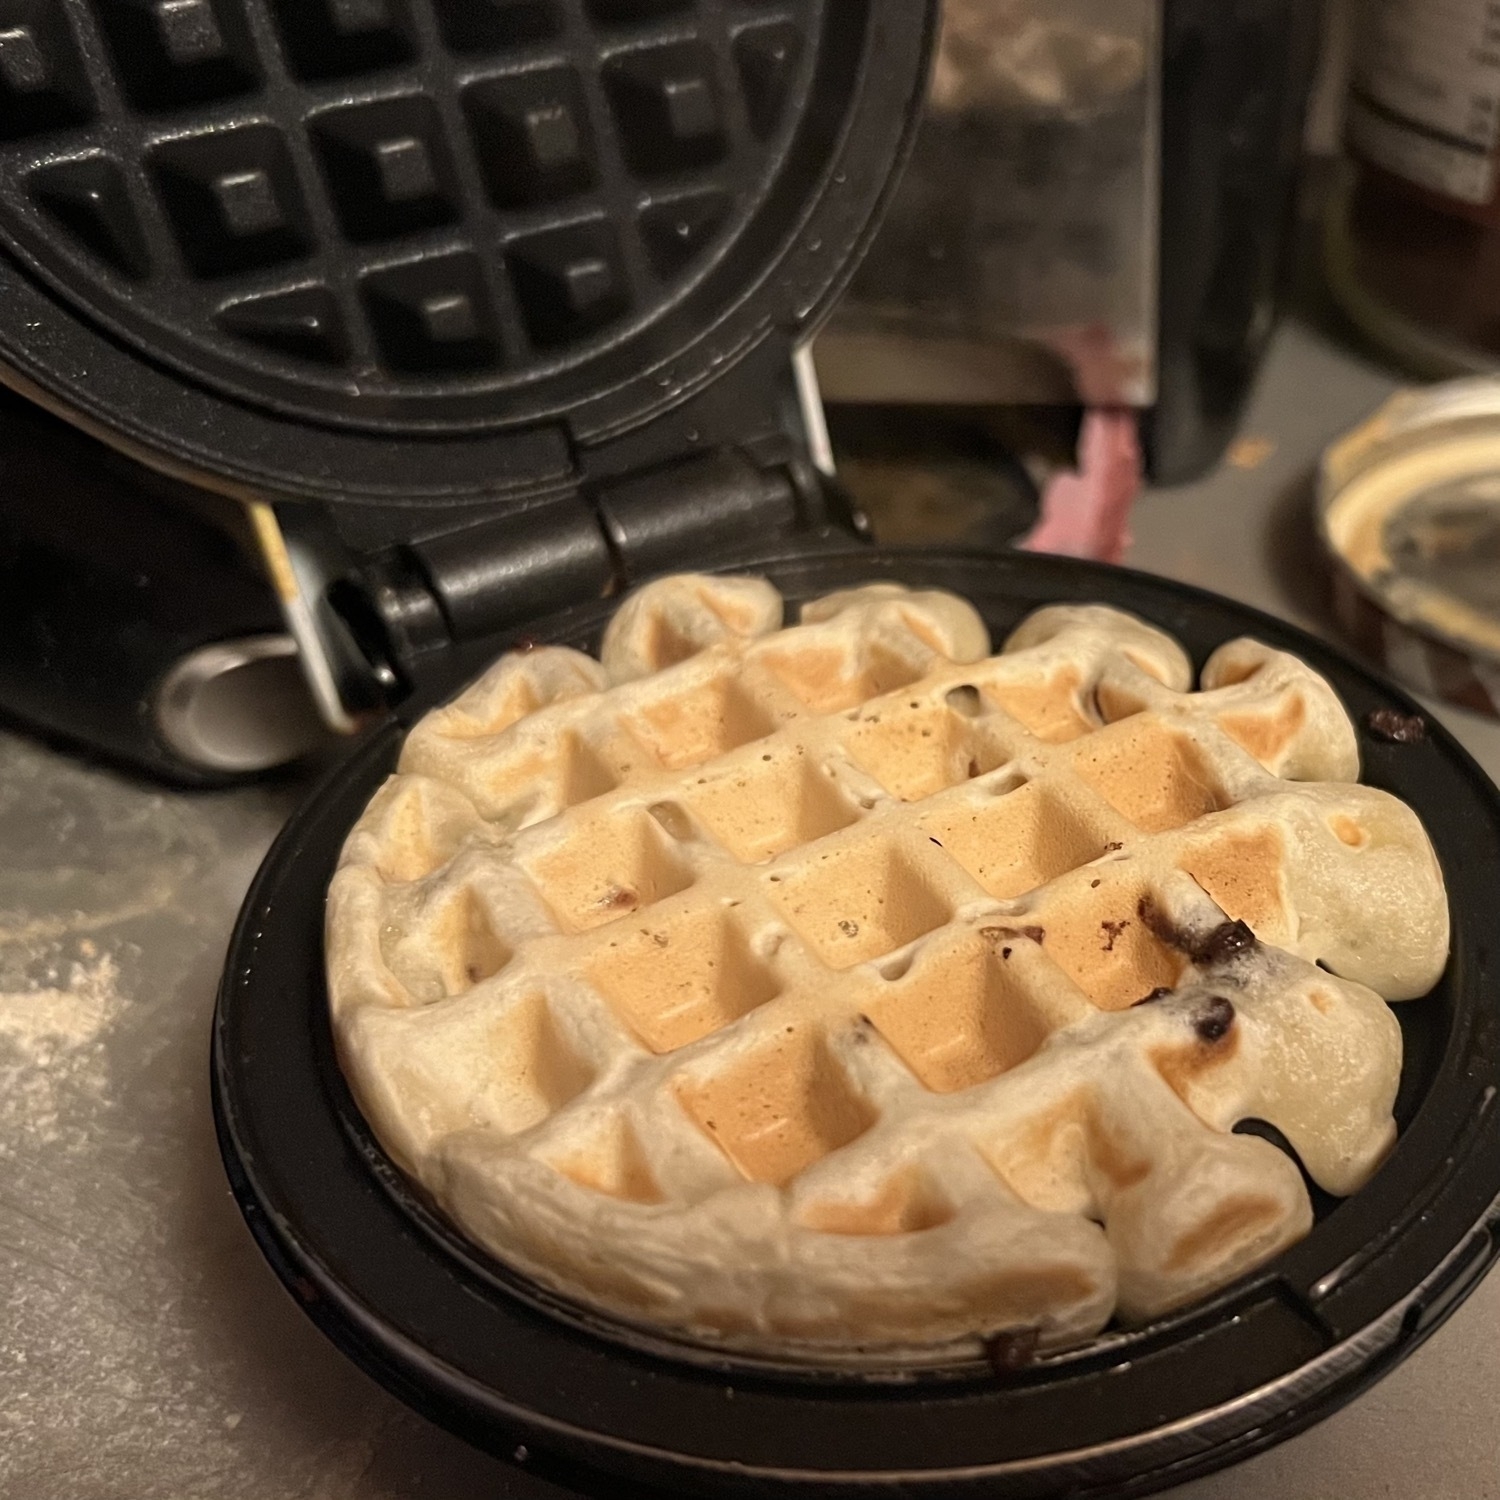 a small waffle iron is open, showing a small recently cooked golden colored waffle